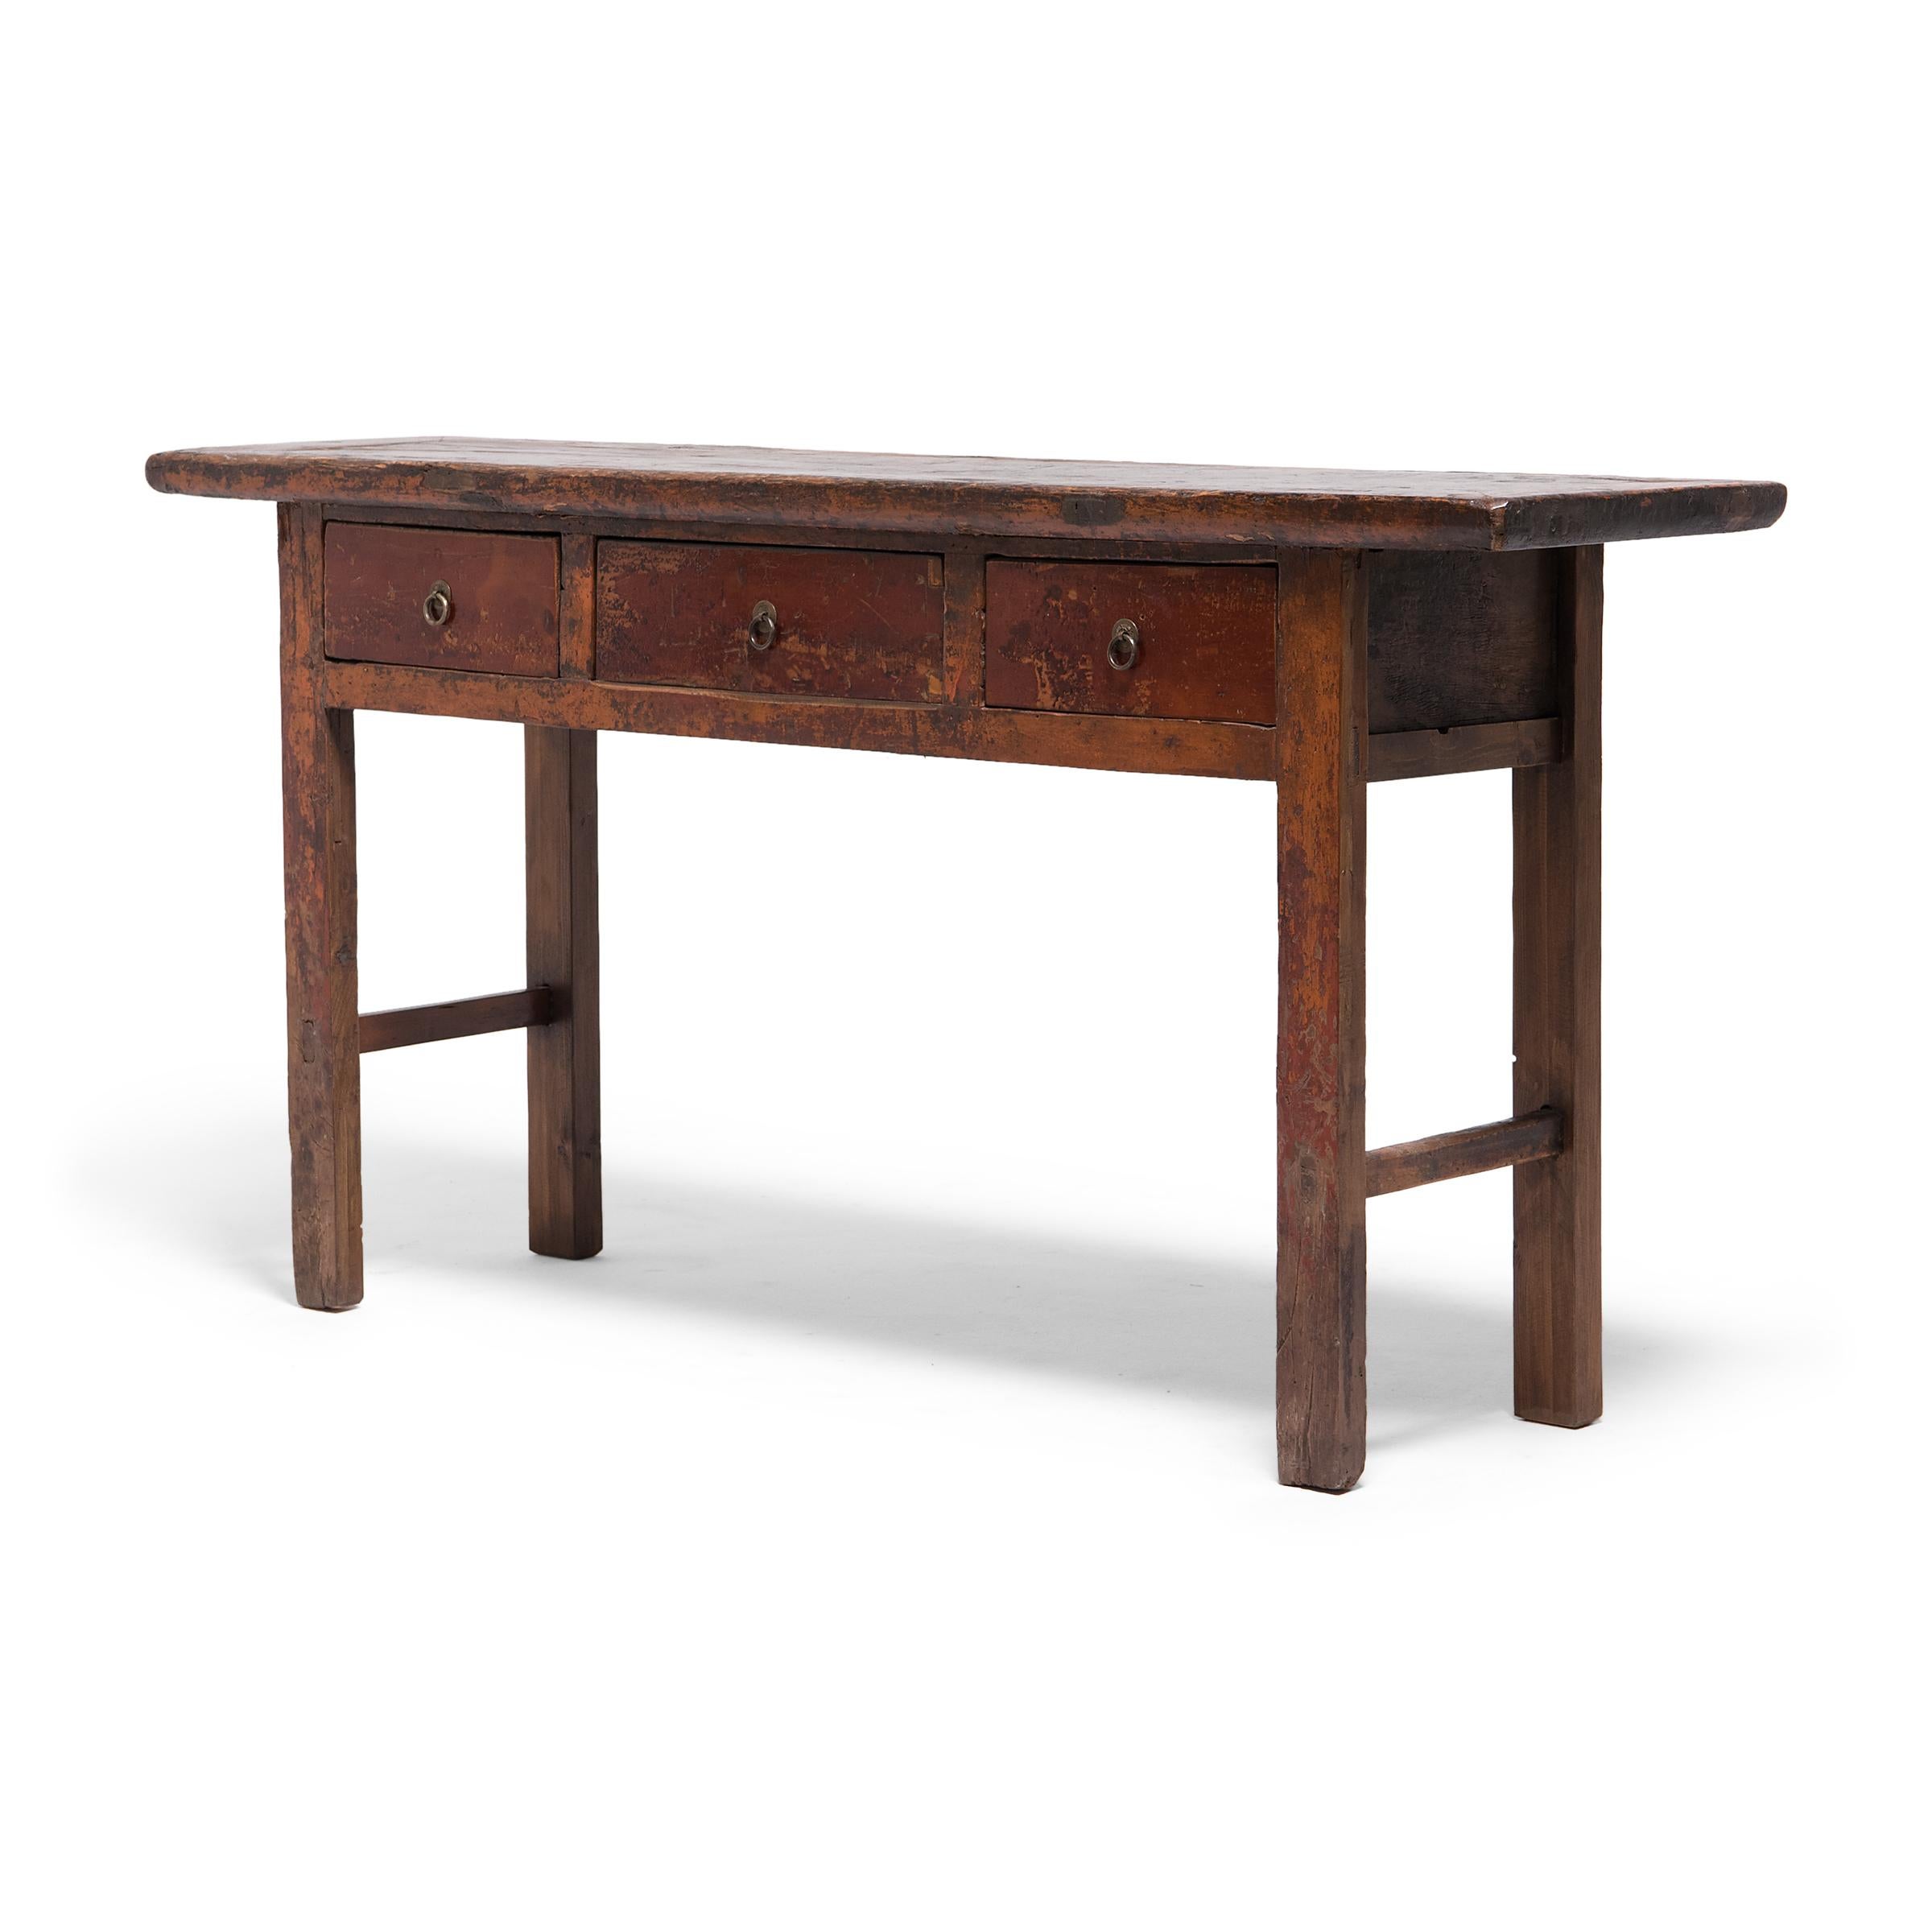 Rustic Chinese Three Drawer Hutong Table, c. 1900